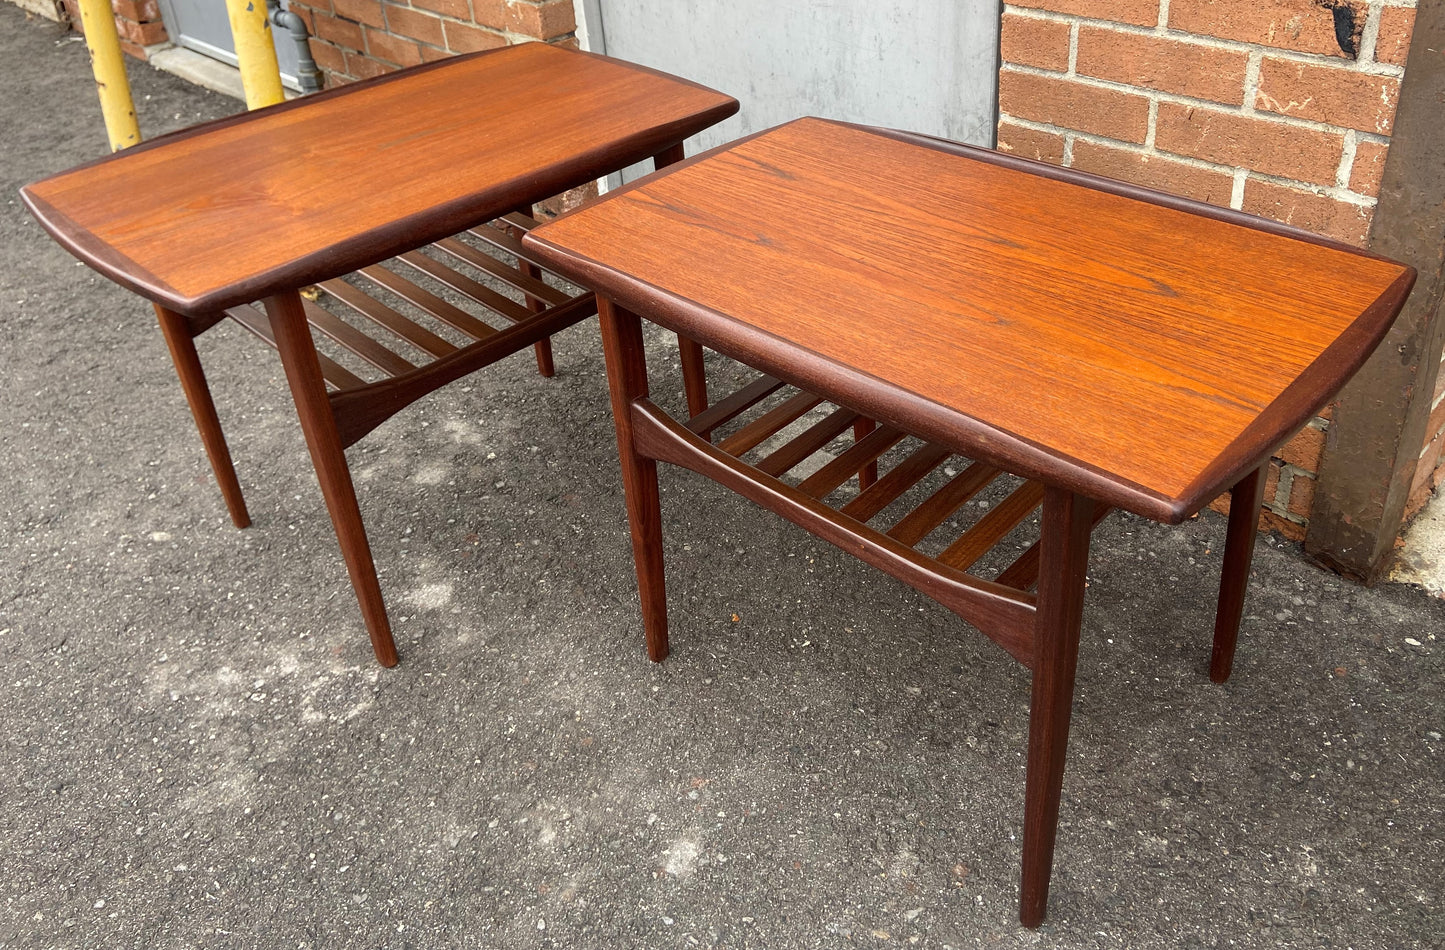 2 REFINISHED Mid Century Modern Teak End Tables w Shelves, Perfect